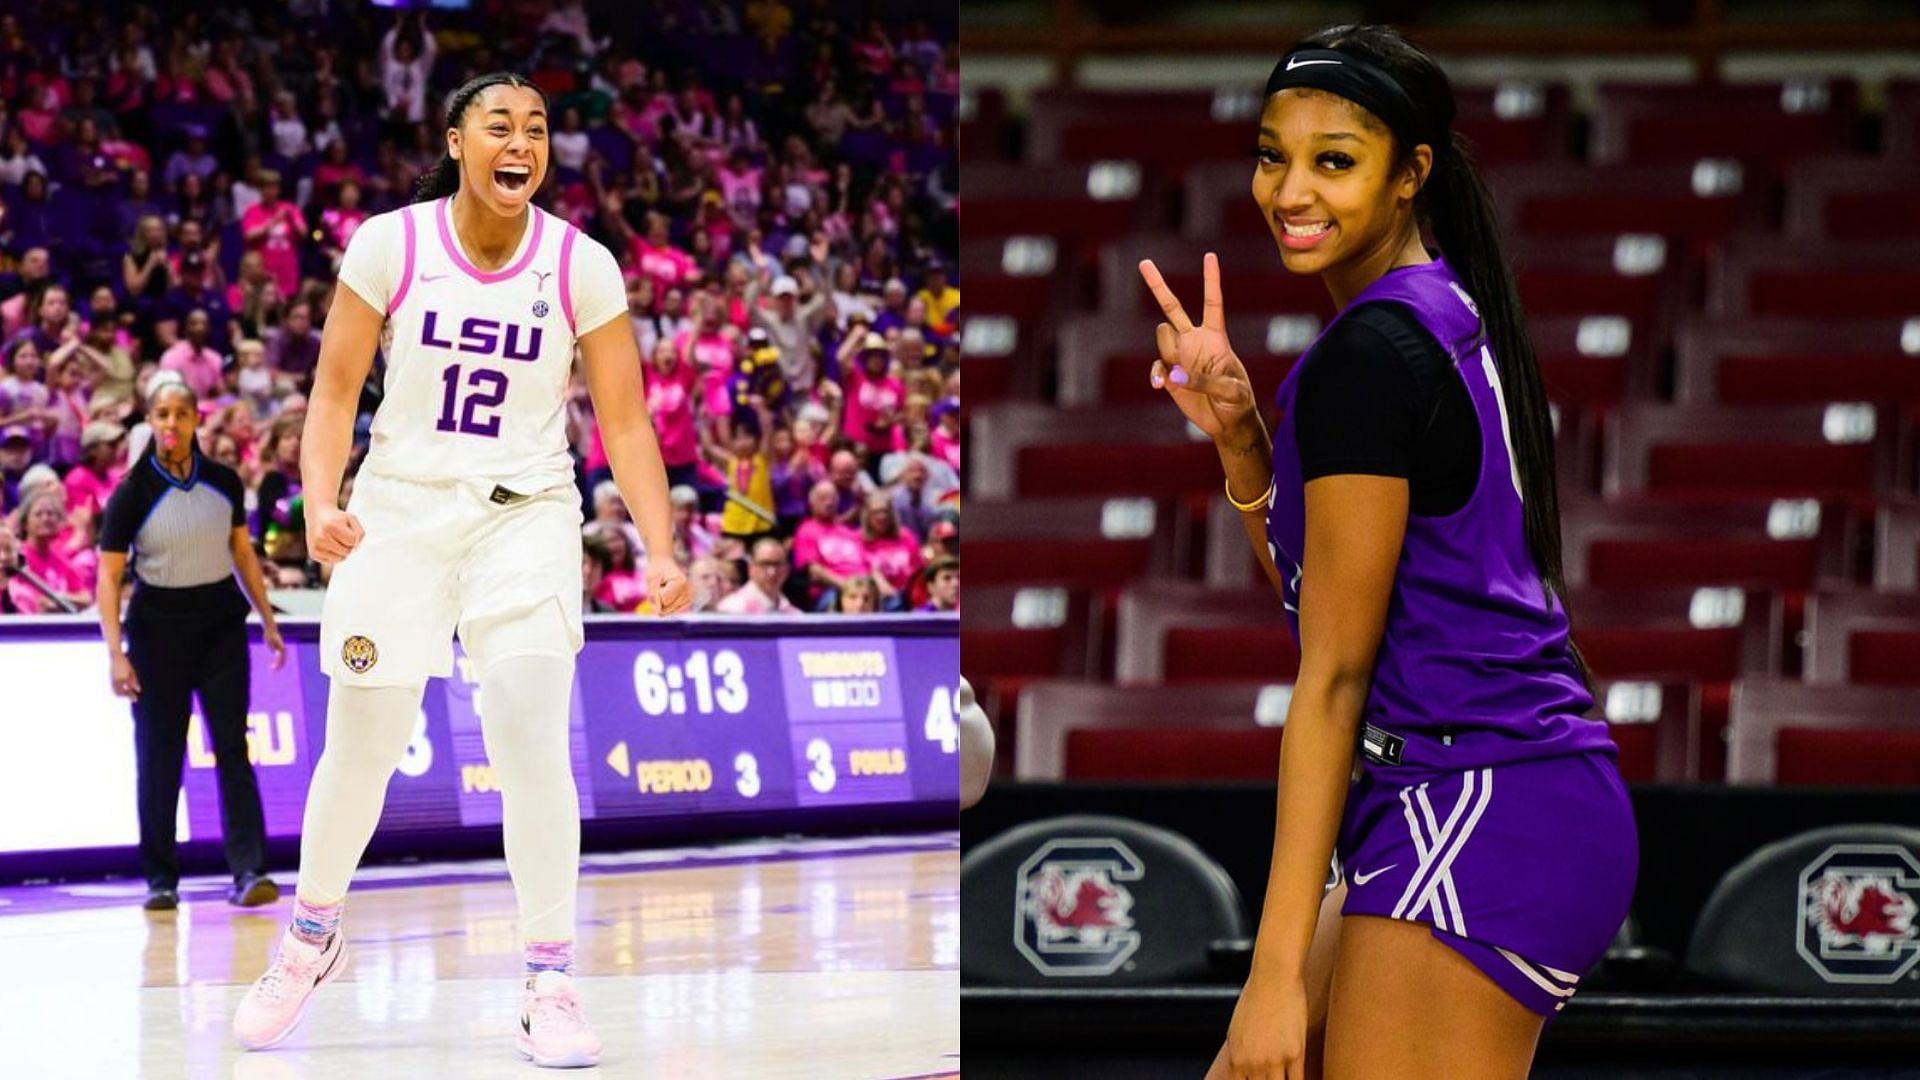 Mikaylah Williams and Angel Reese share a cute social media moment.